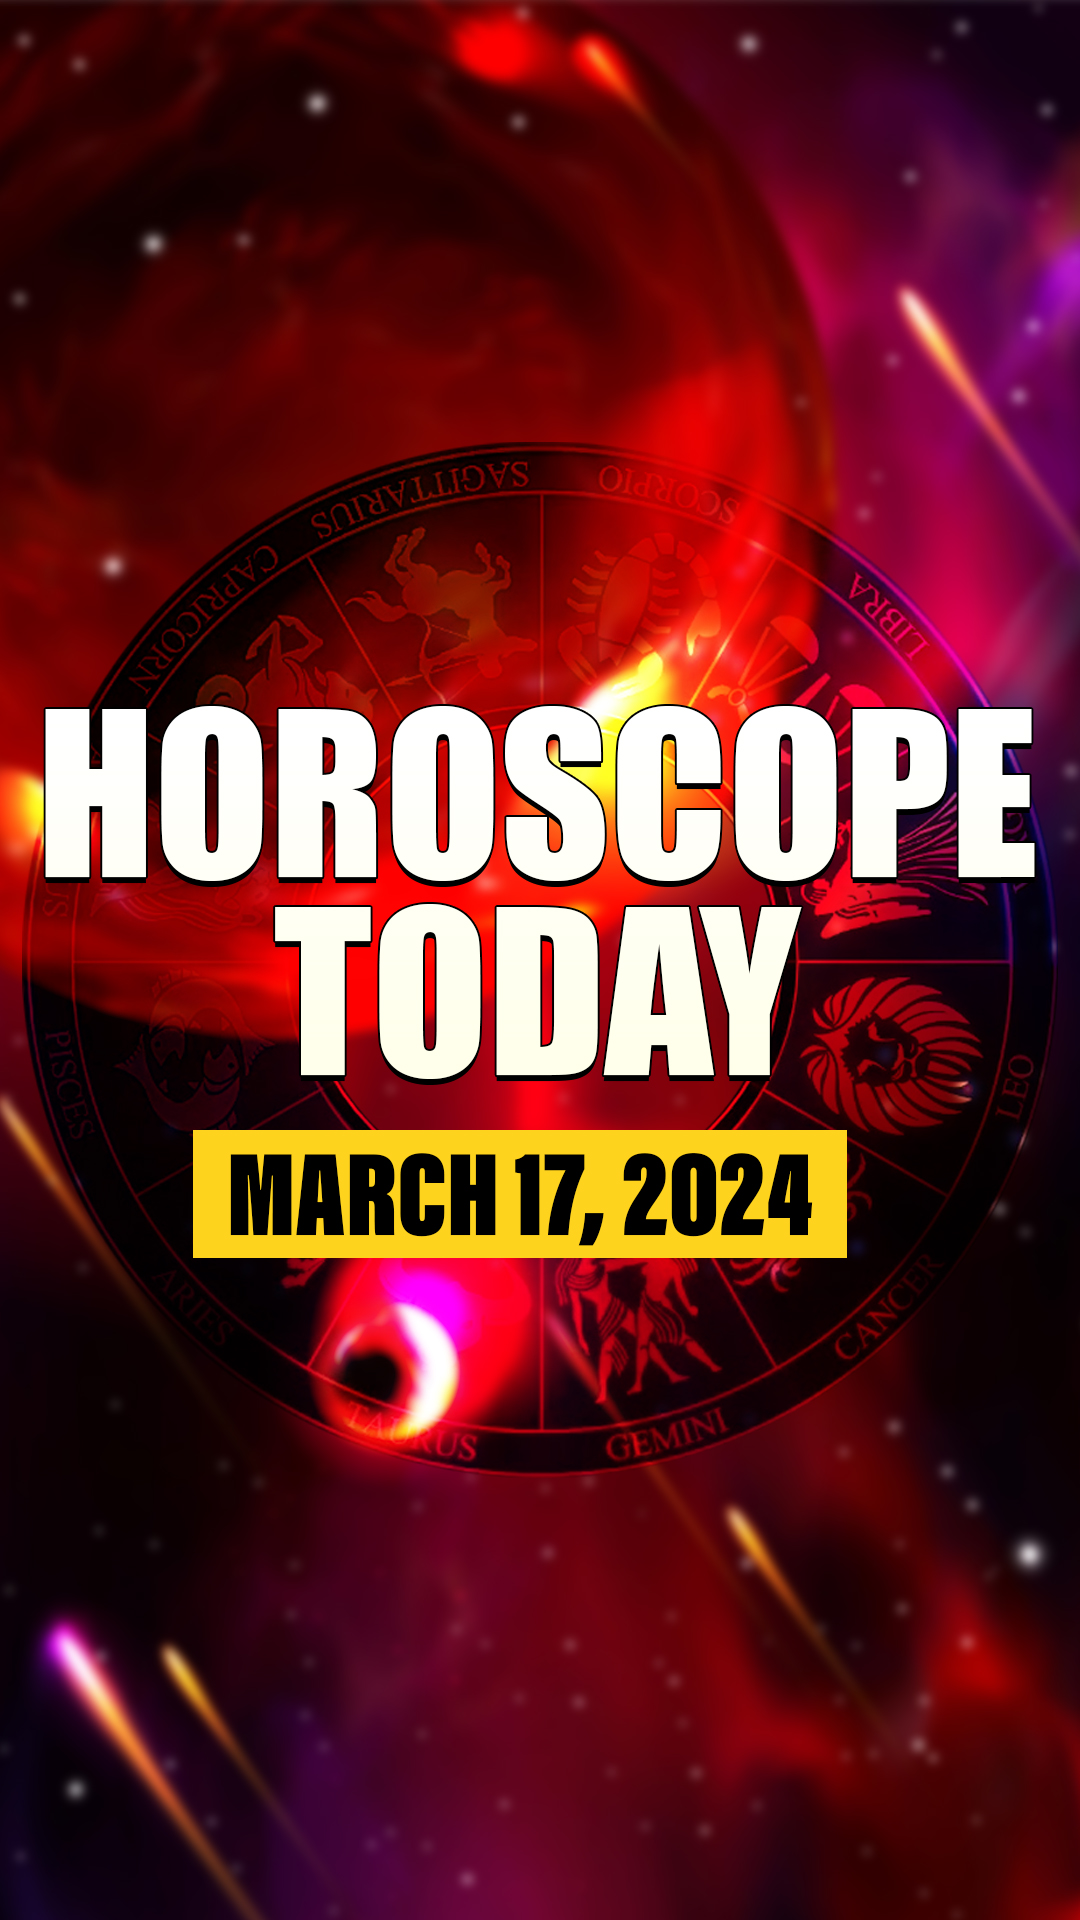 Sagittarius to get new source of income, know about other zodiac signs in March 17, 2024 horoscope